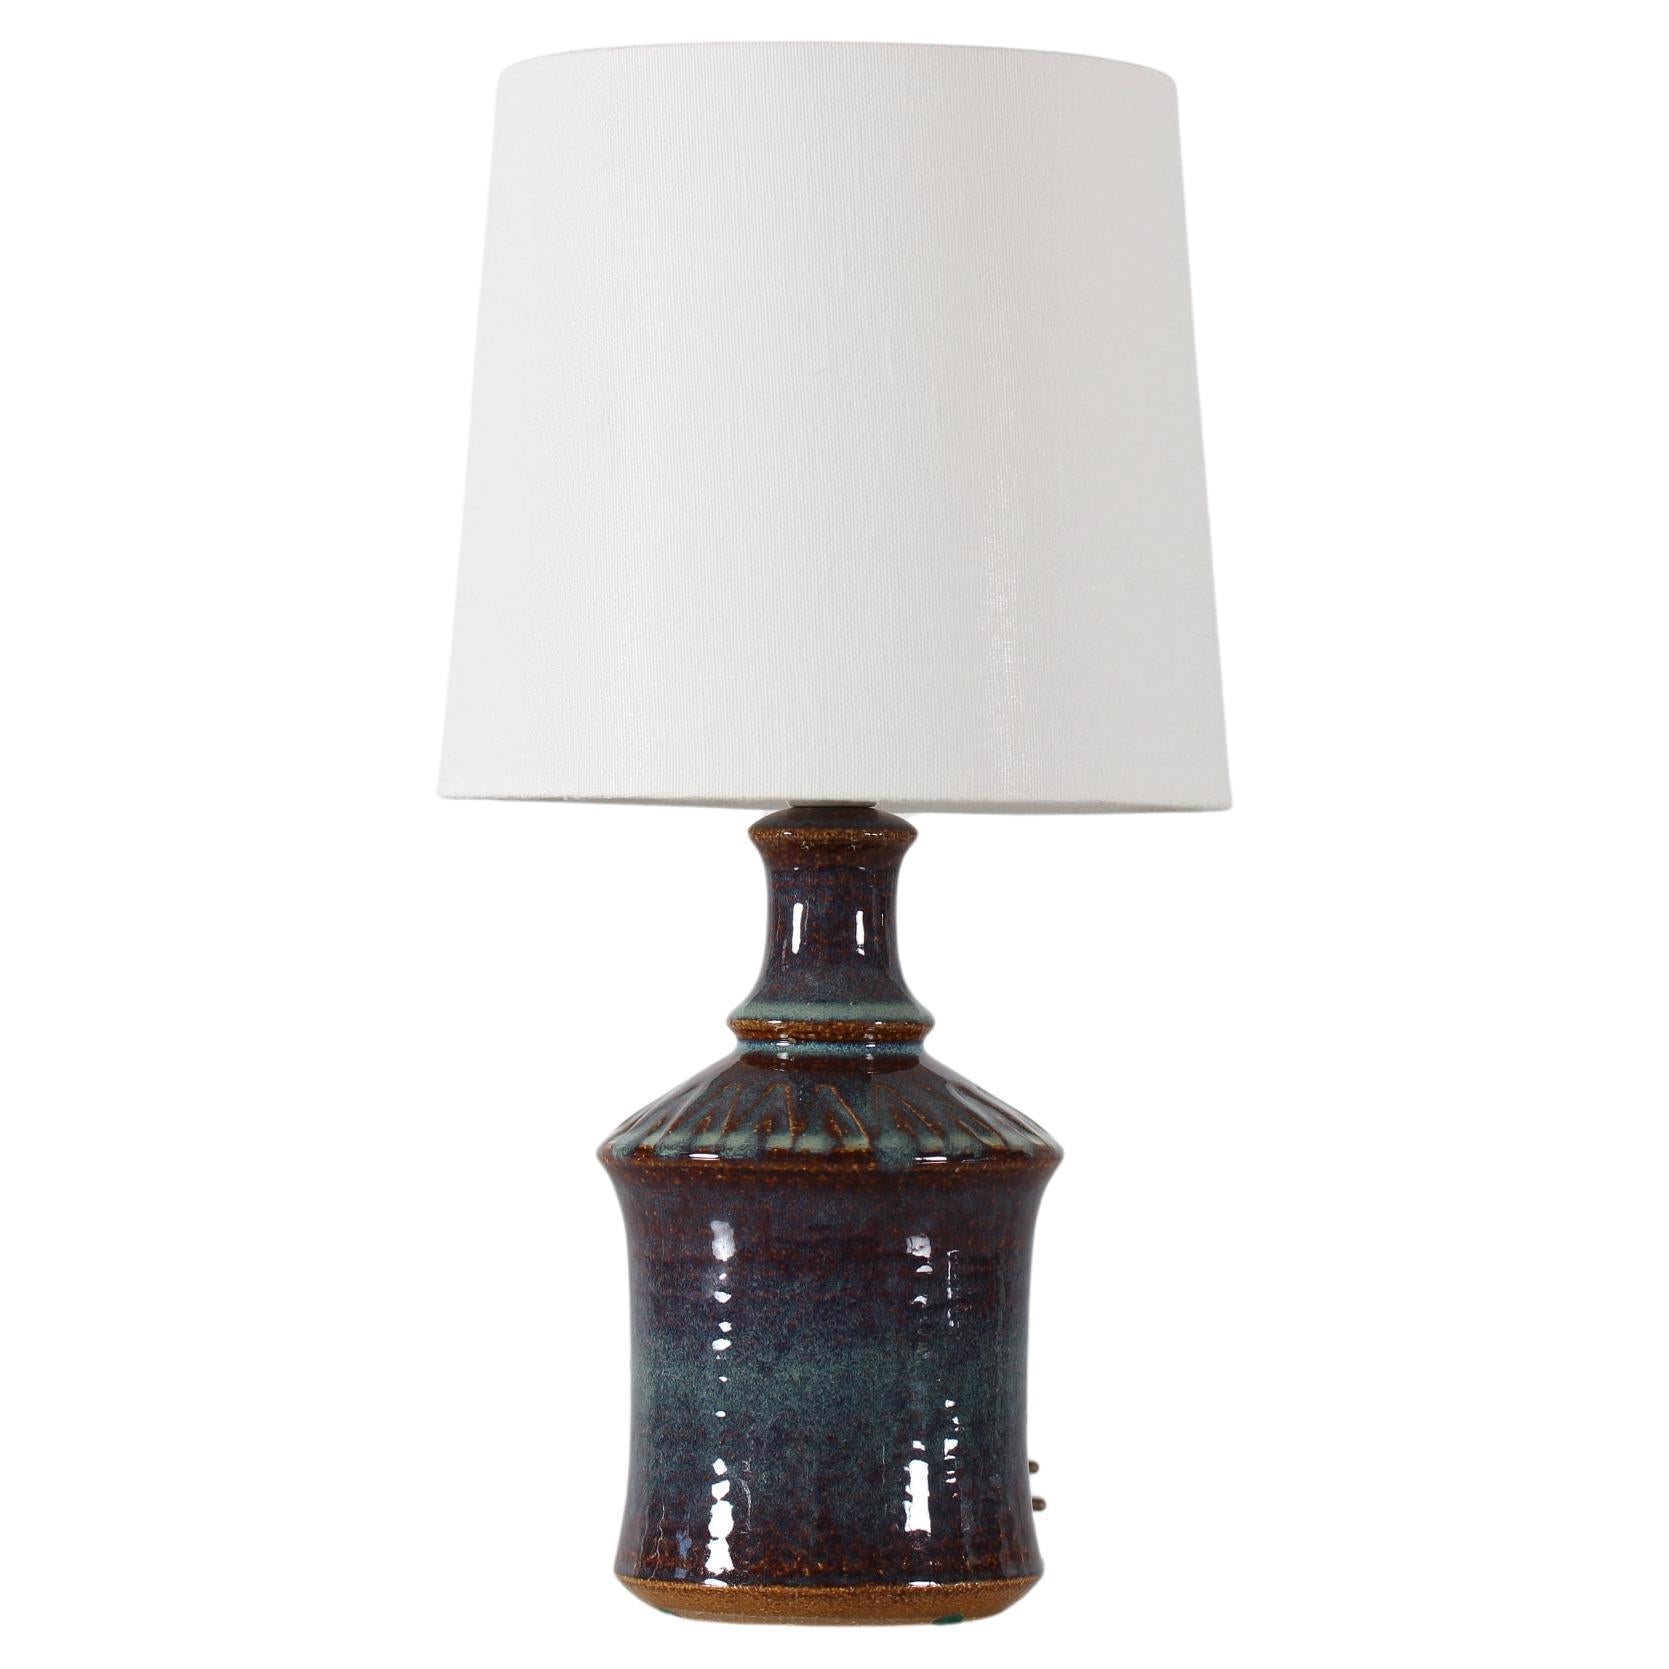 Danish Søholm Ceramic Table Lamp with Blue + Turquoise Glaze + New Shade, 1960s For Sale